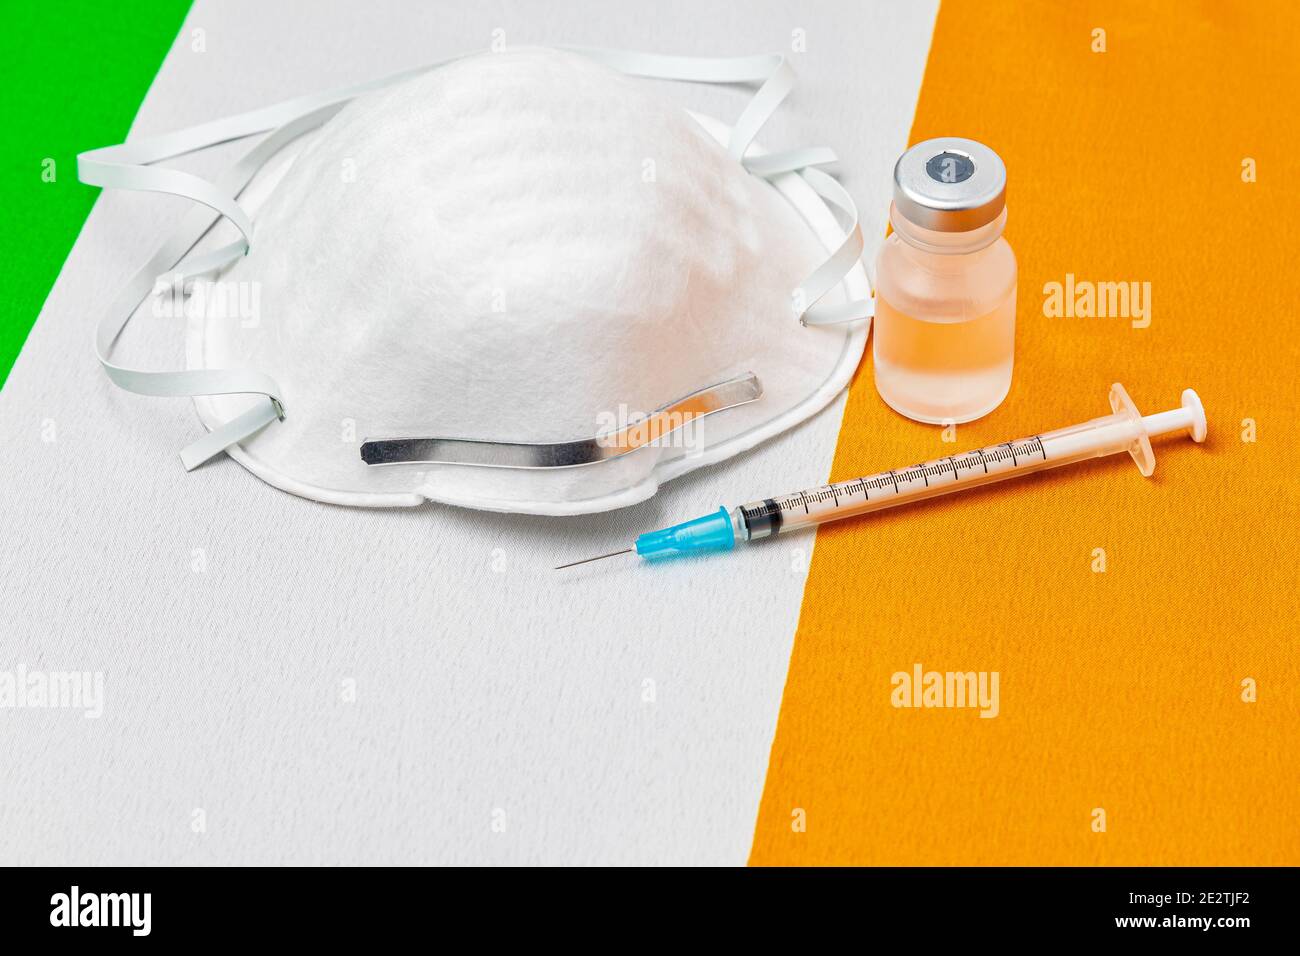 Ireland flag, n95 face mask, needle syringe and vial. Concept of Covid-19 coronavirus vaccine distribution, supply shortage and healthcare crisis Stock Photo